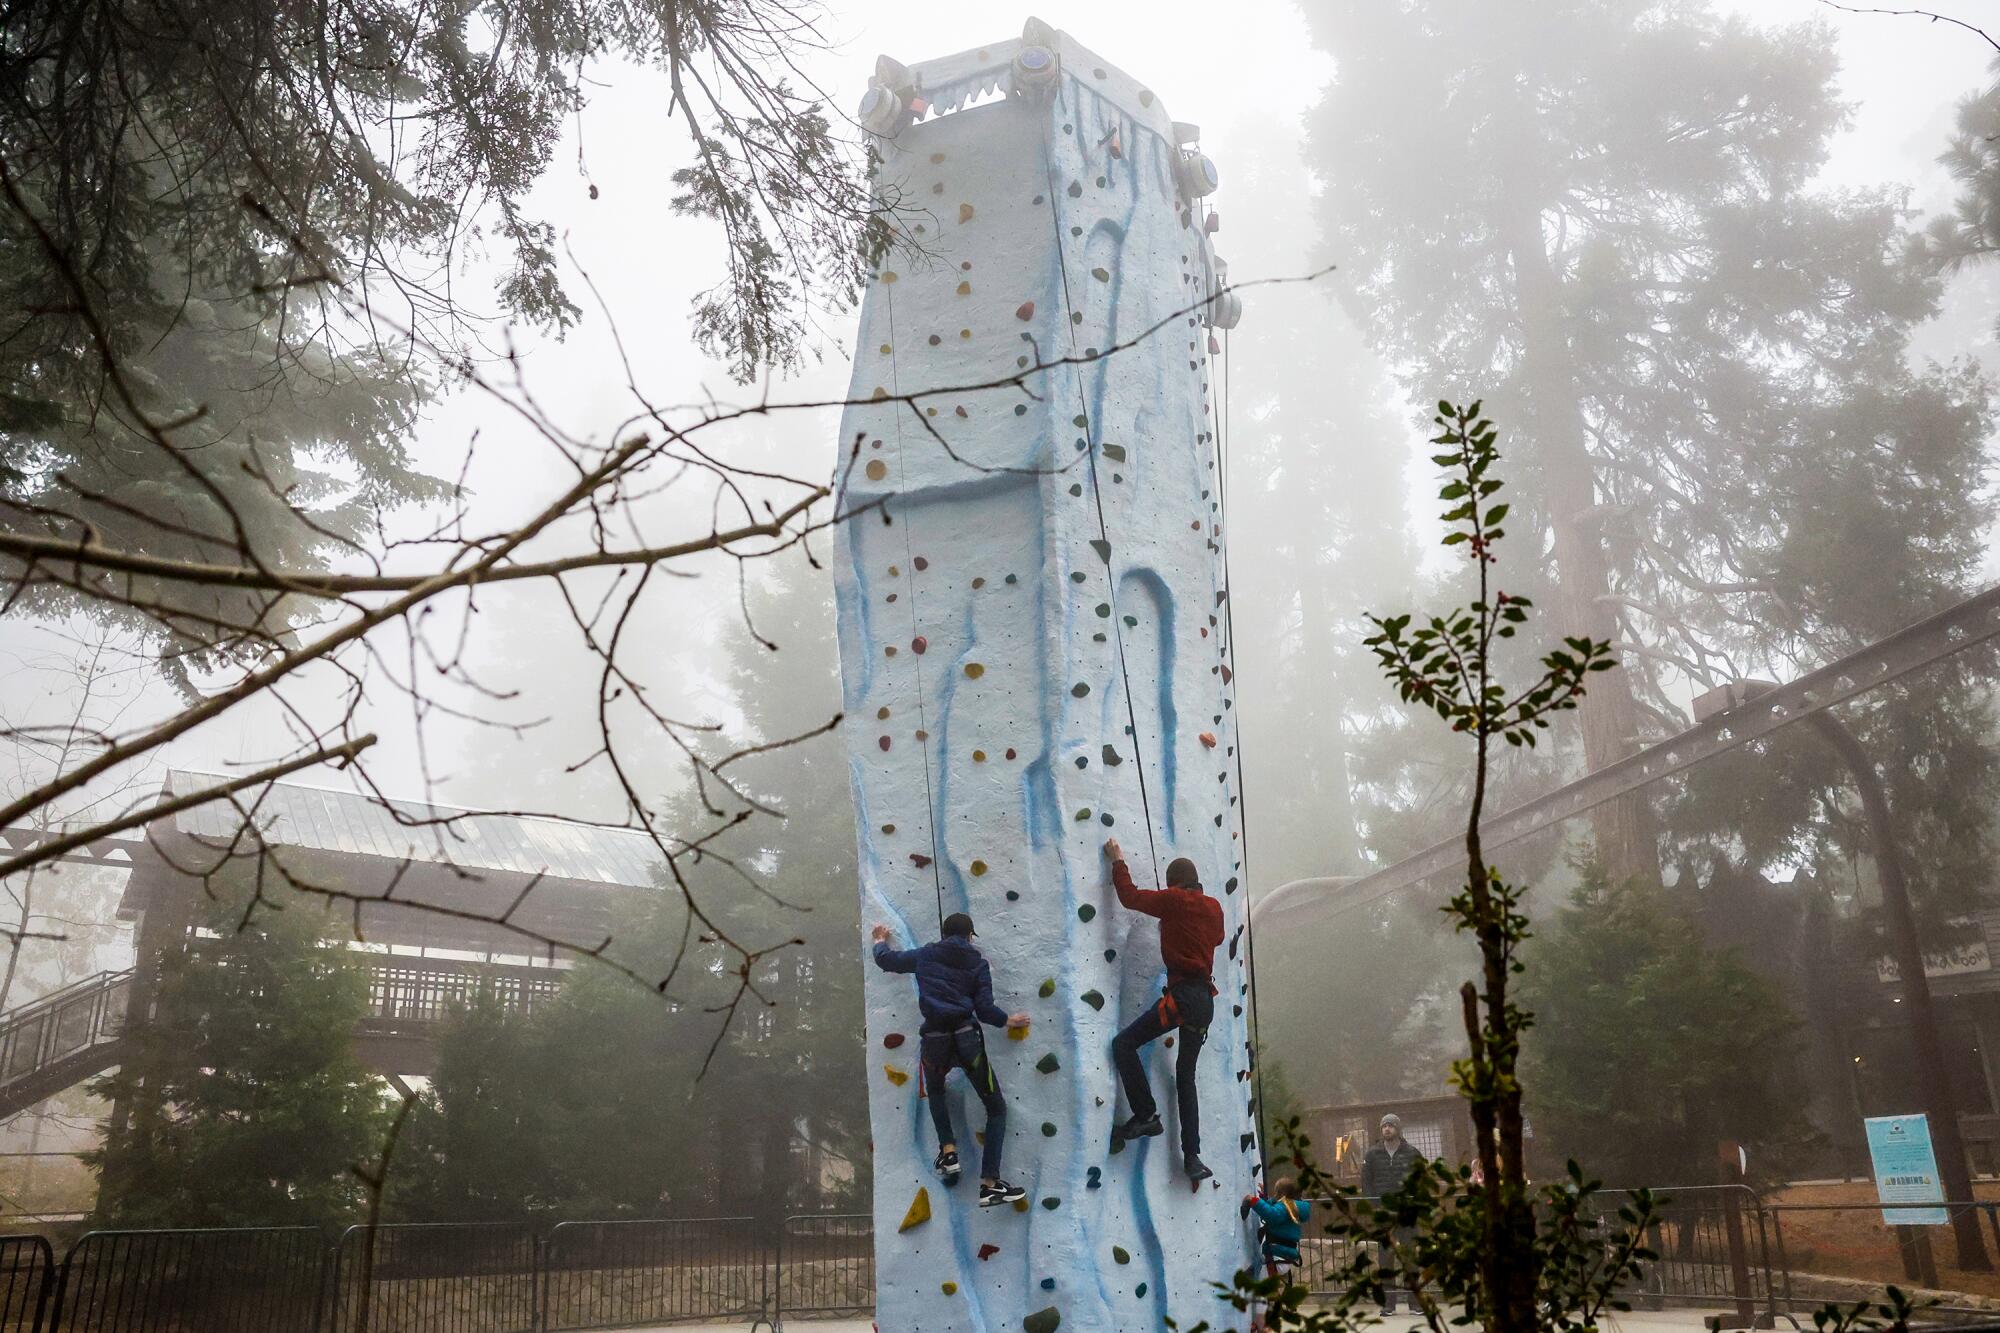 People climbing a rock wall in a foggy wooded area.